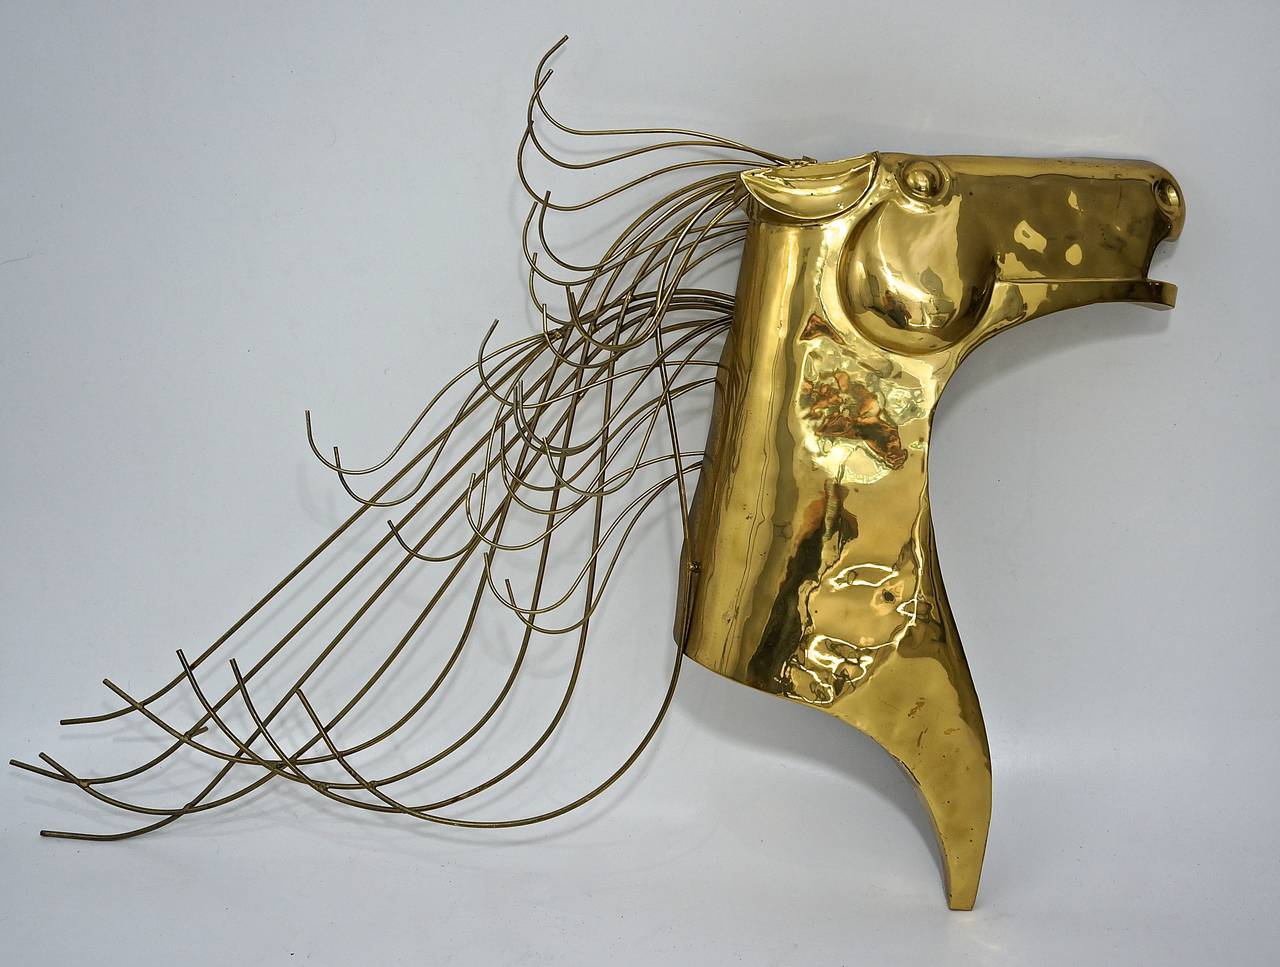 This monumental scaled iconic C. Jere Mustang wall sculpture was created in 1984 by Artisan House Inc. of Los Angeles, Ca..

This stylized Mustang head with flowing and undulating mane was designed  C. Jere in 1984 and was fabricated by Artisan